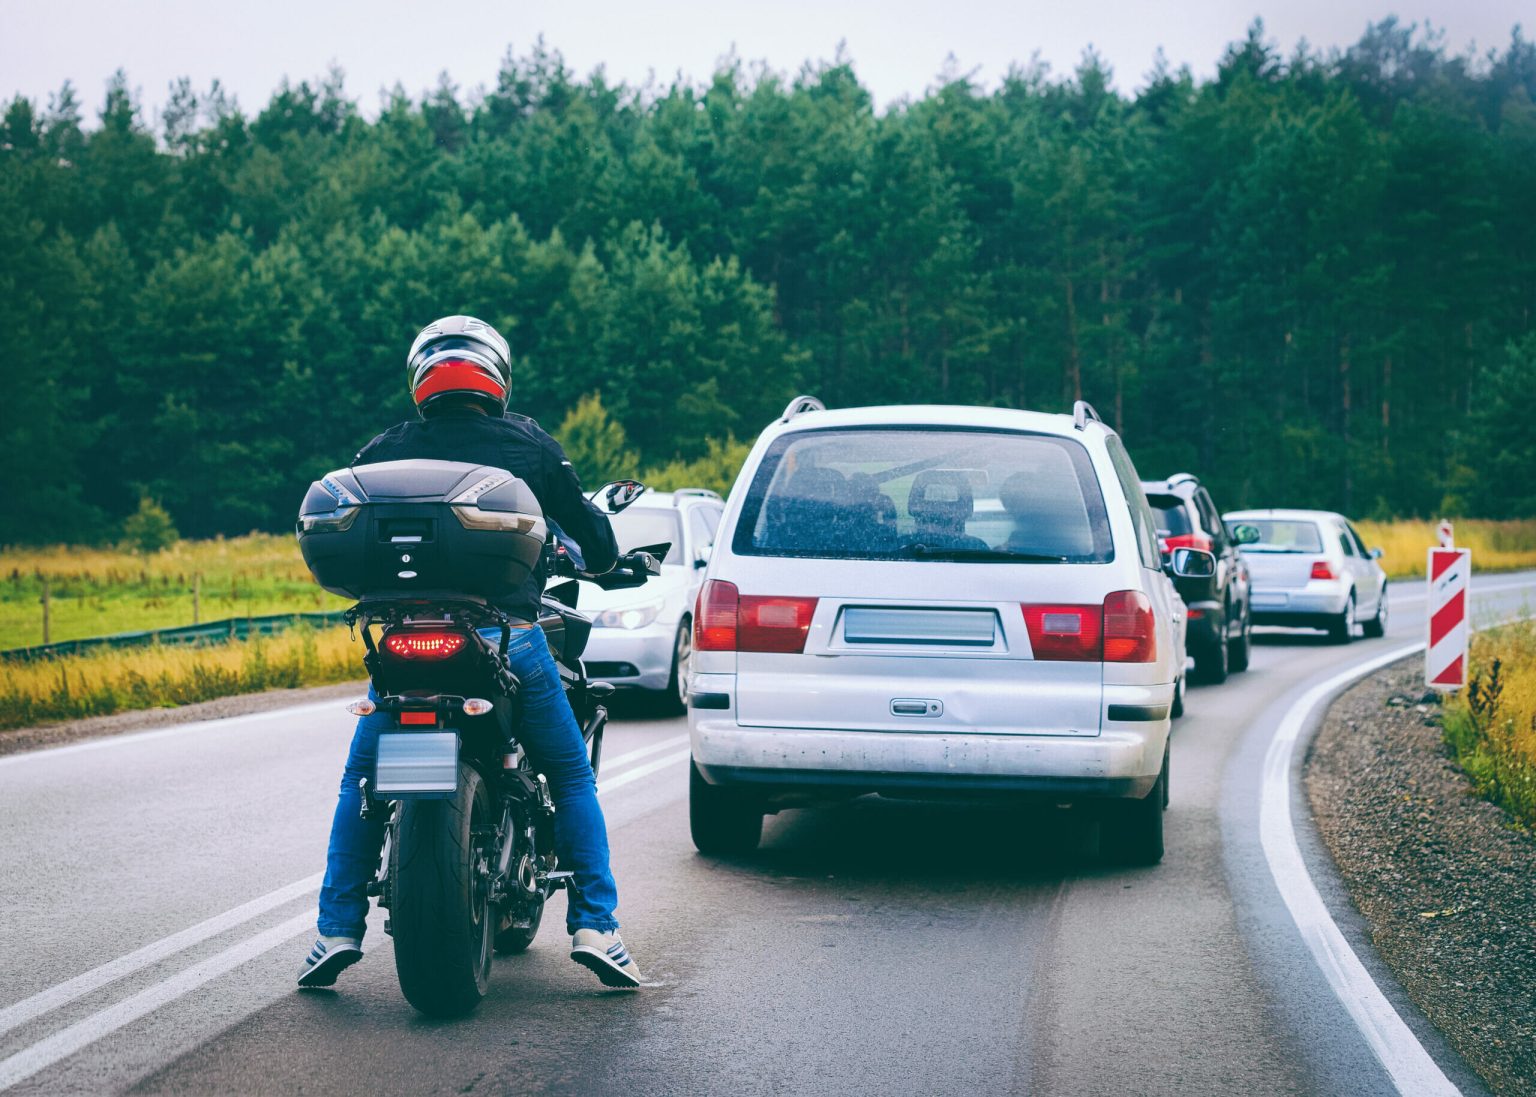 5 Motorcycle Safety Tips You Should Know